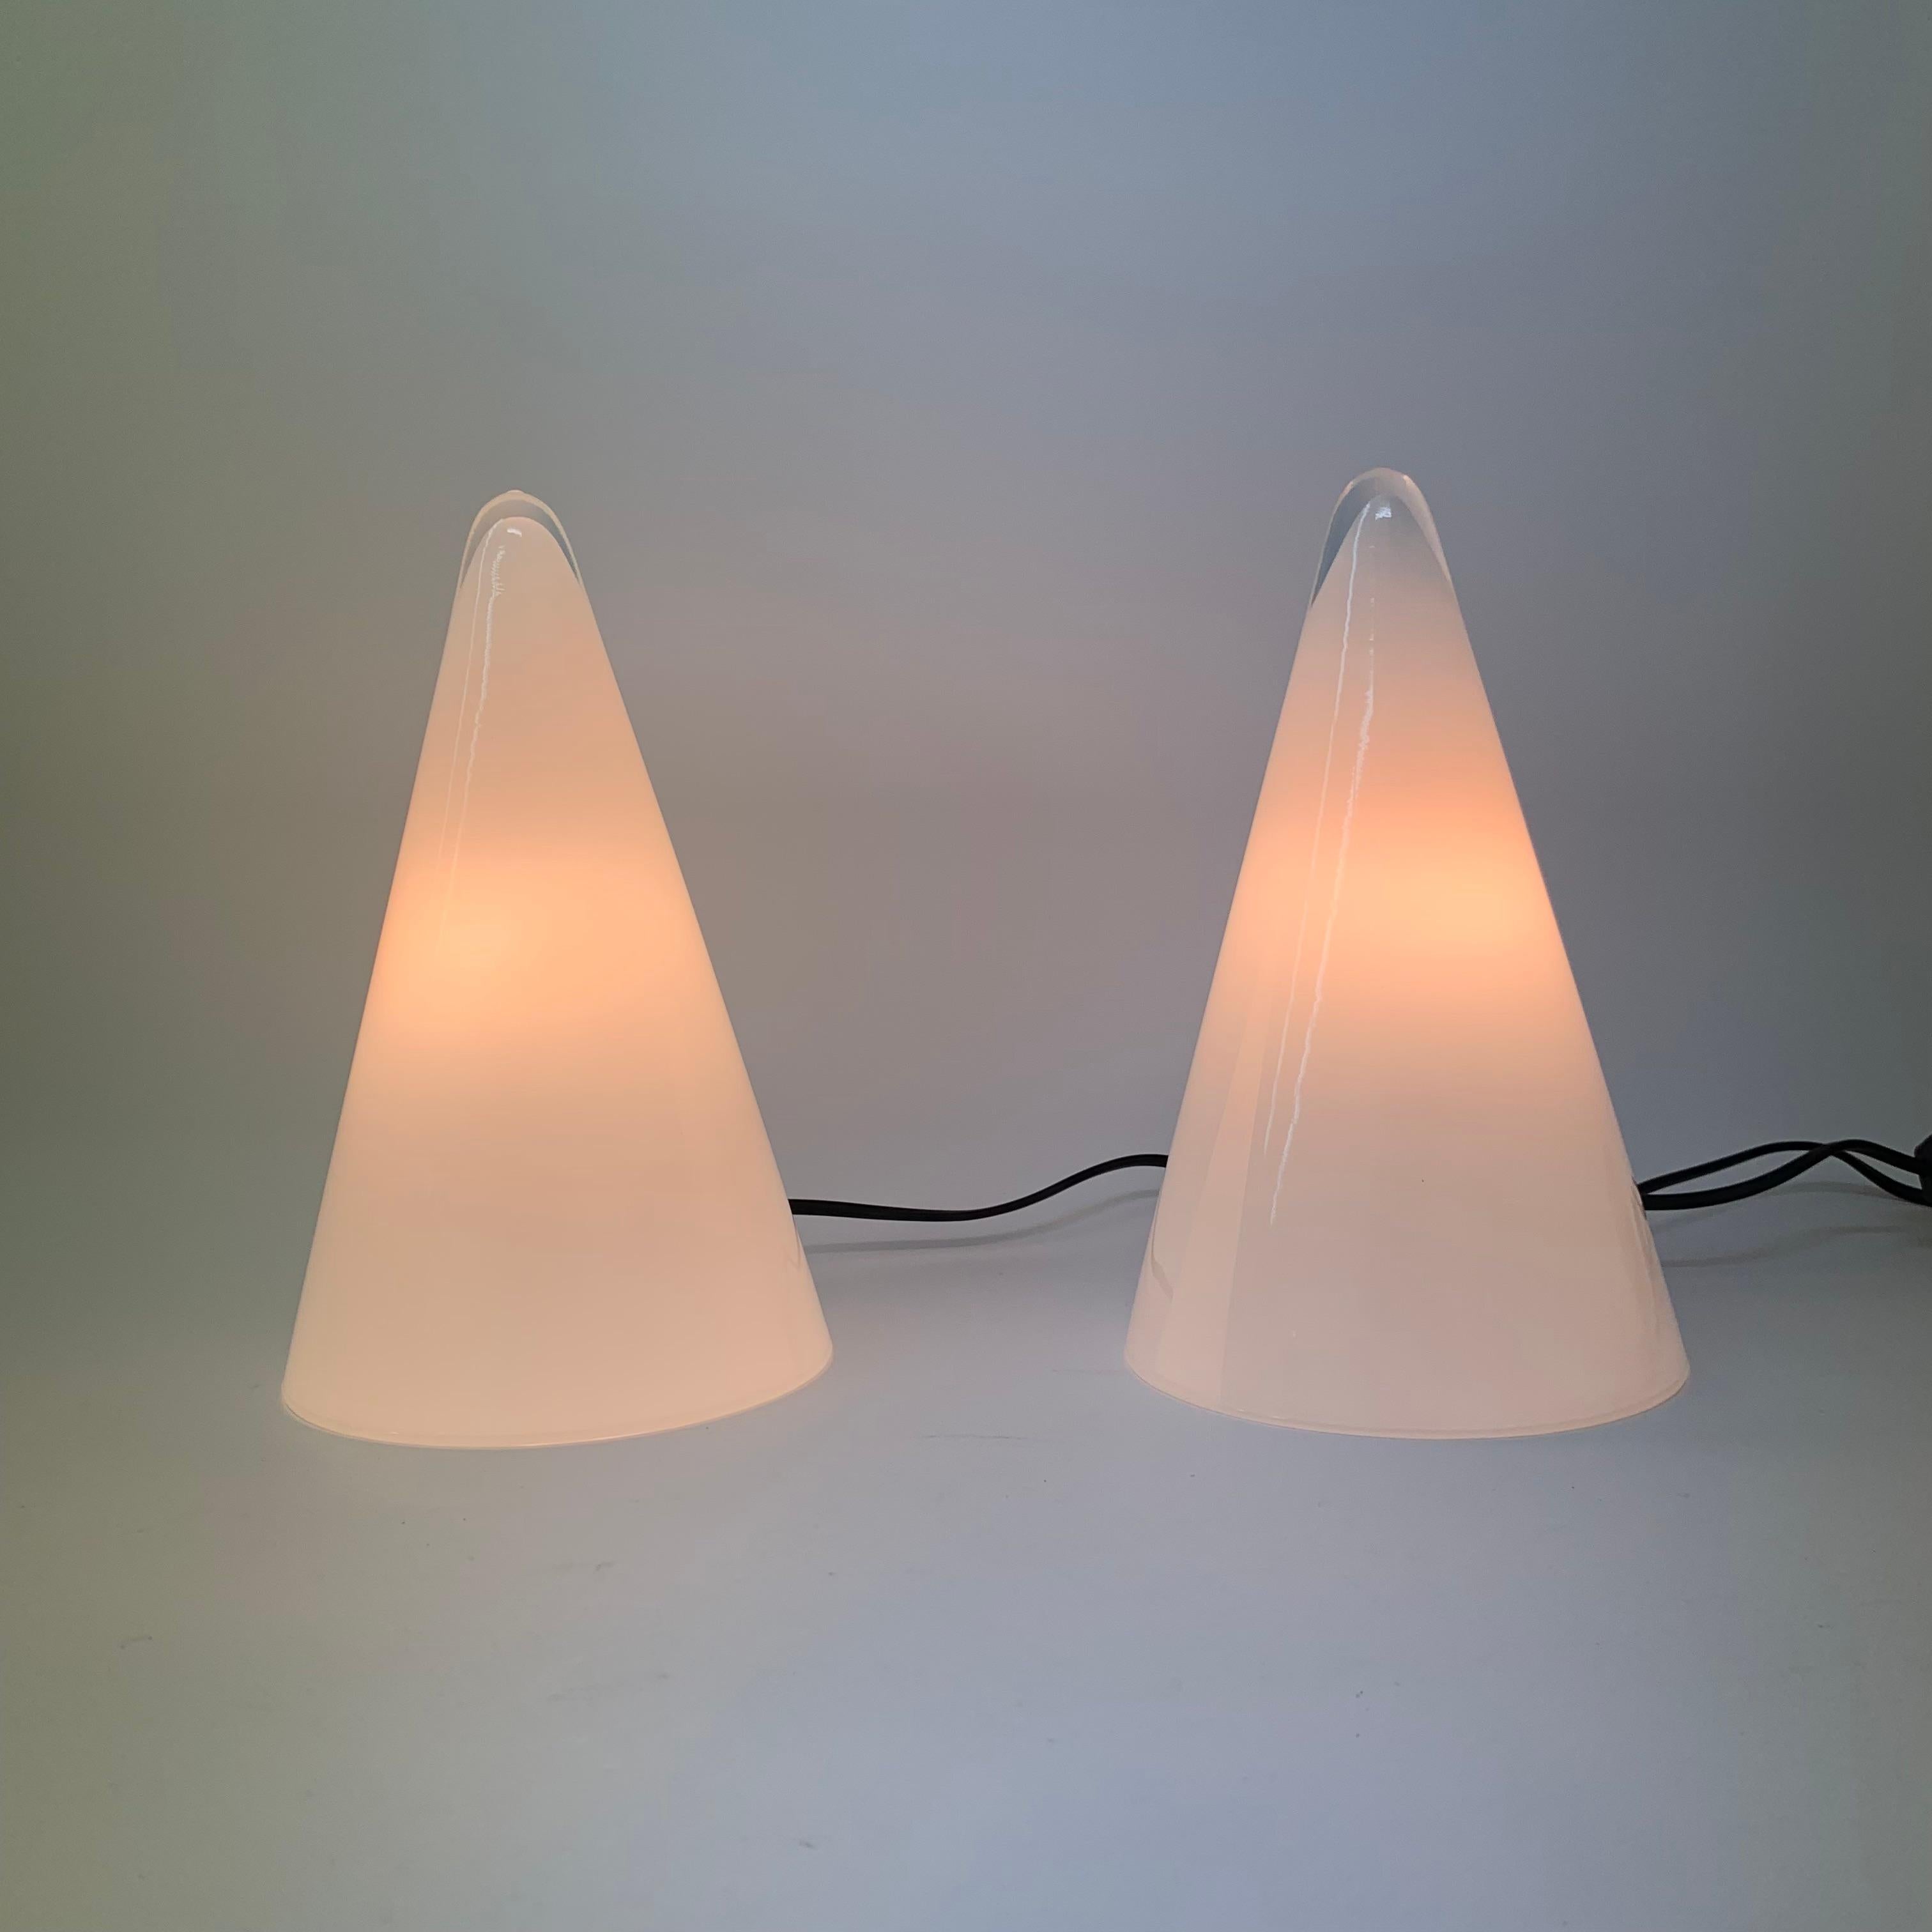 European Set of 2 SCE Teepee Table Lamps, 1970’s, France For Sale